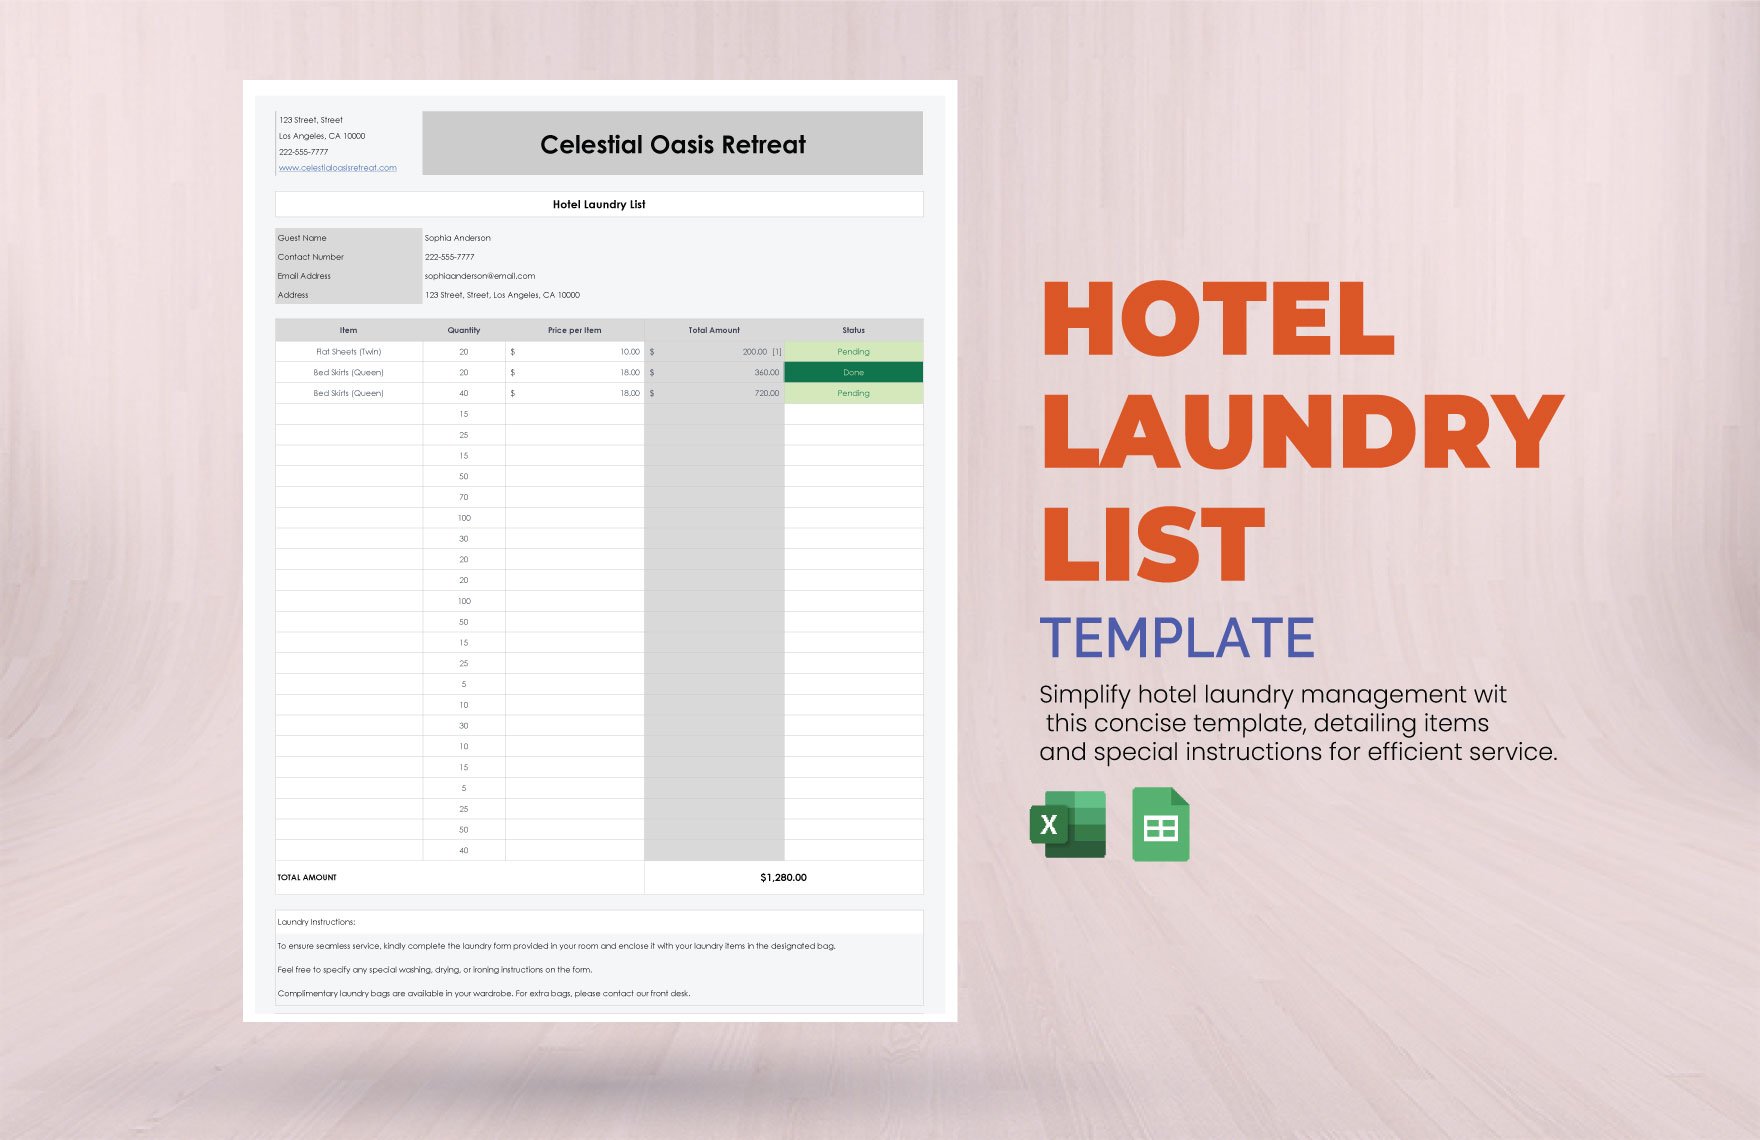 Hotel Laundry List Template